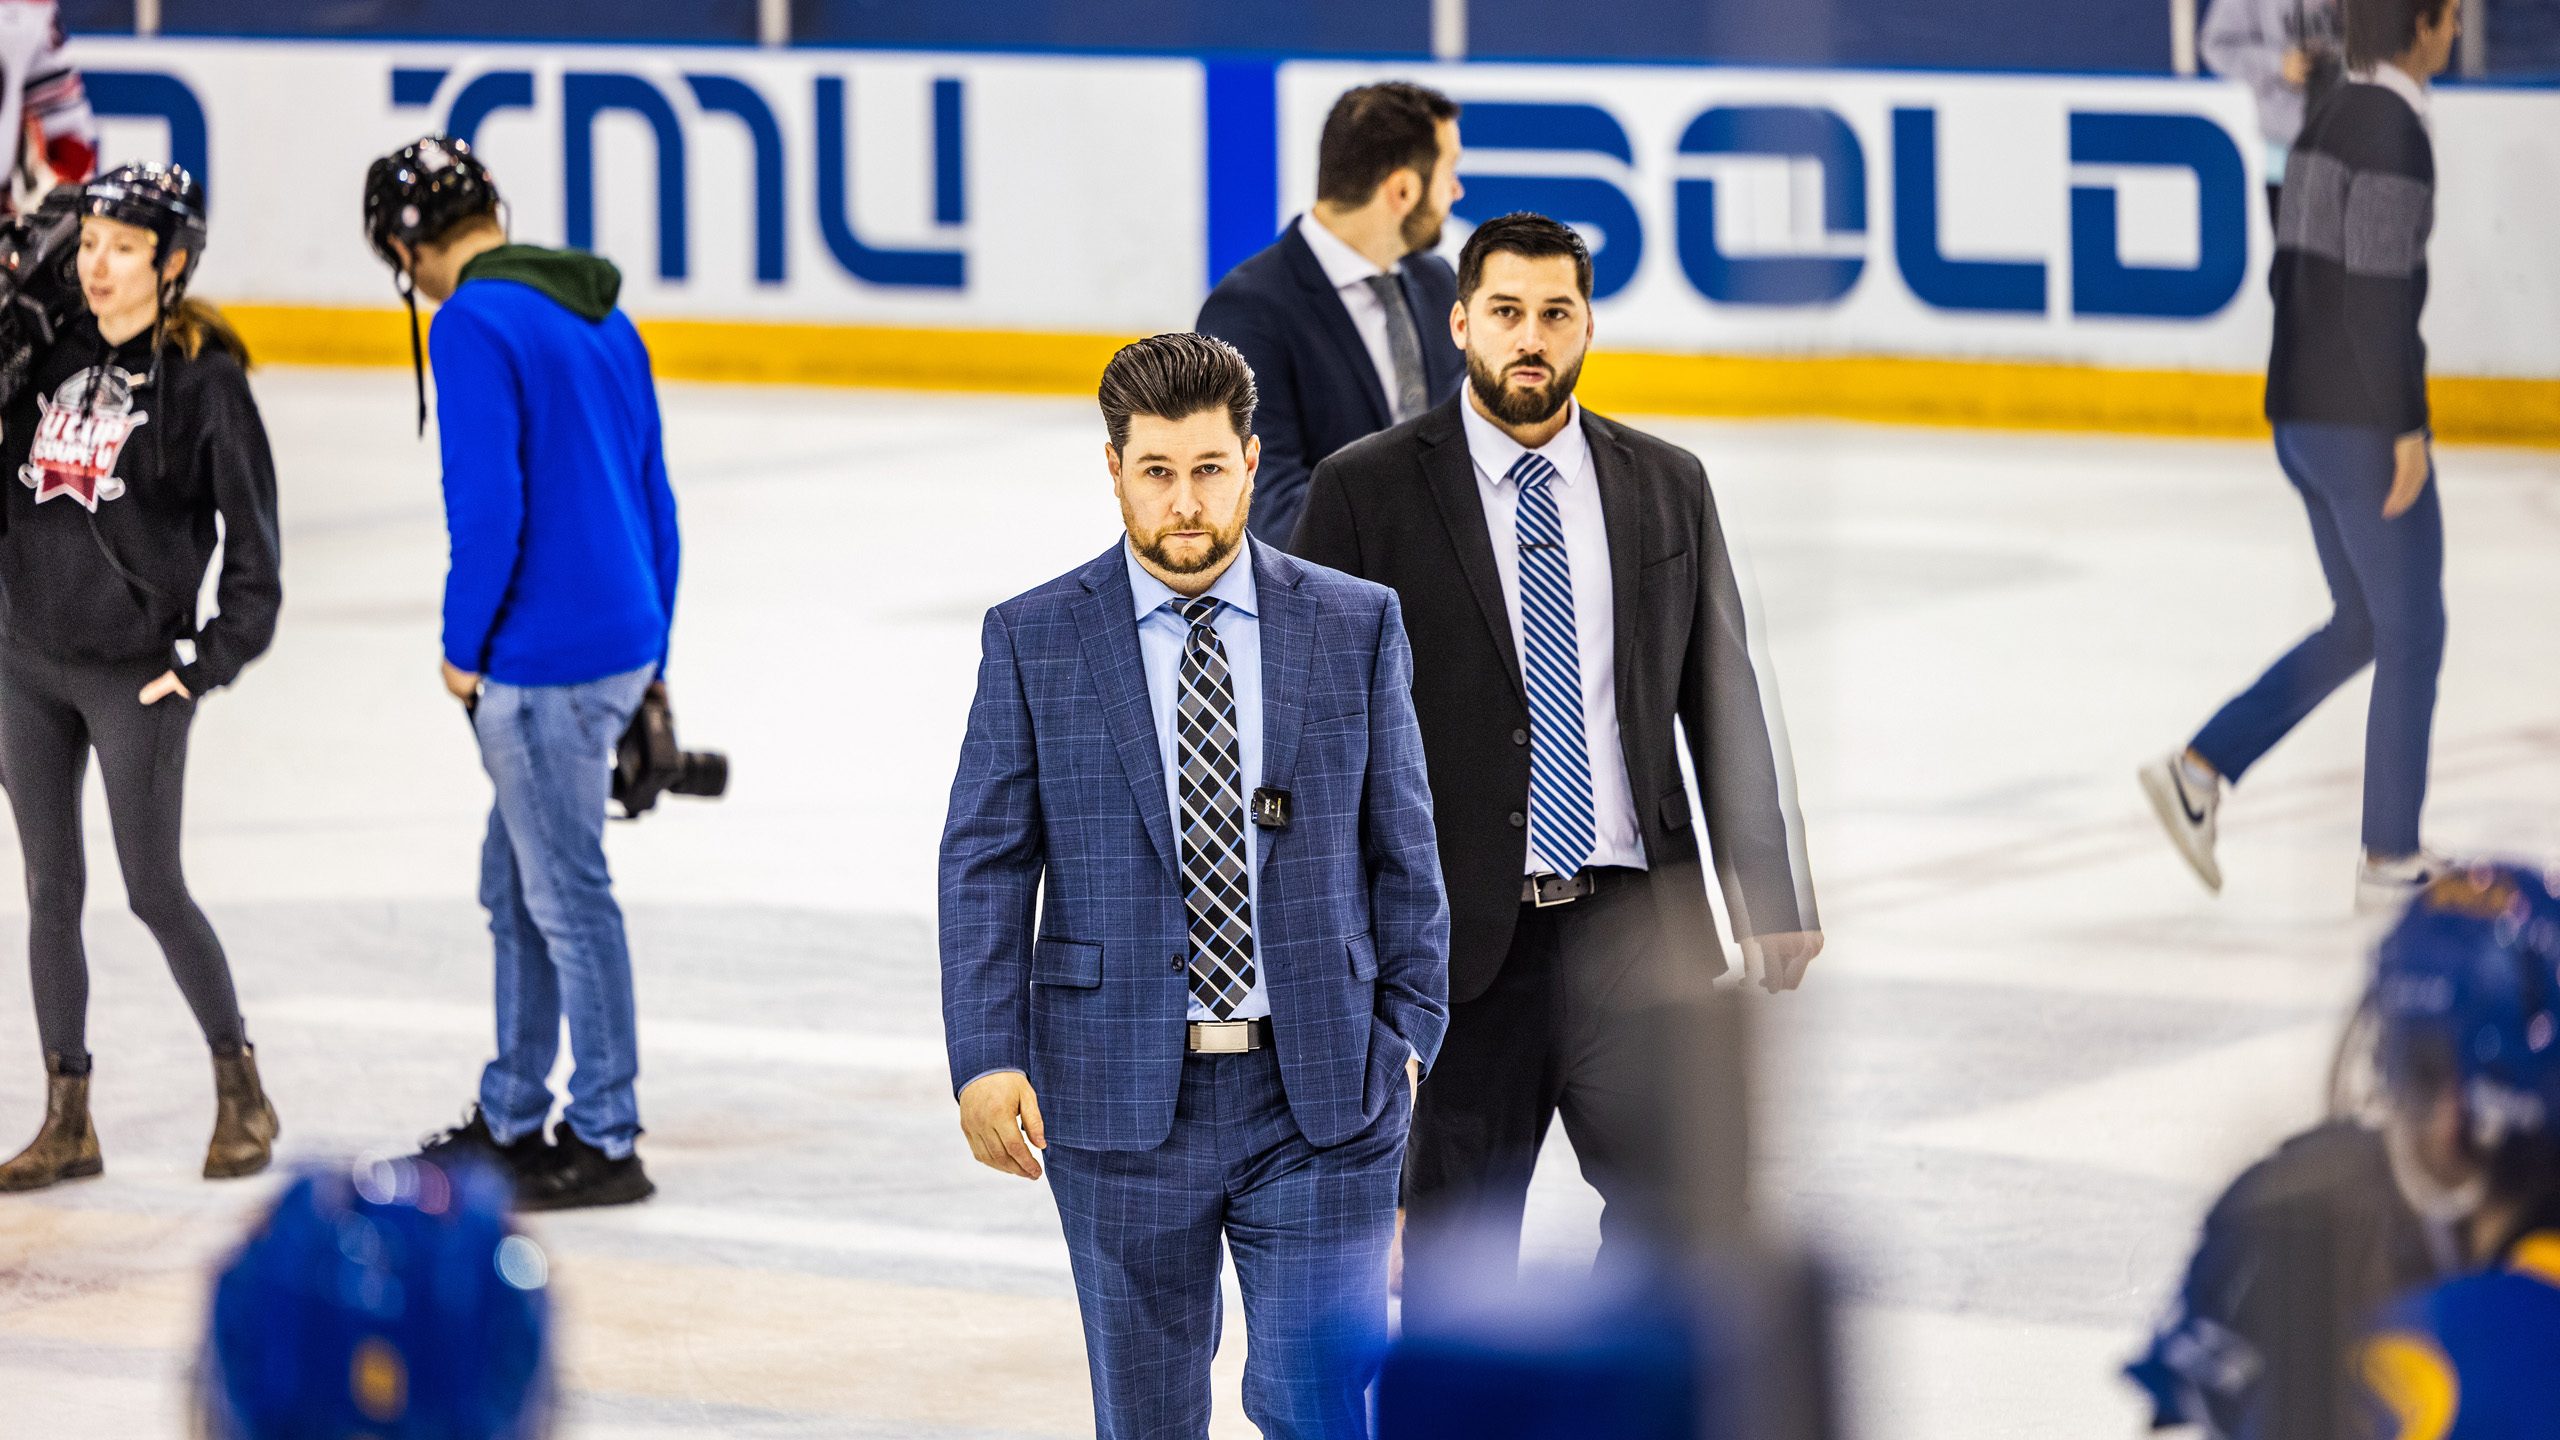 TMU head coach Johnny Duco looks looks somber on the ice post-game